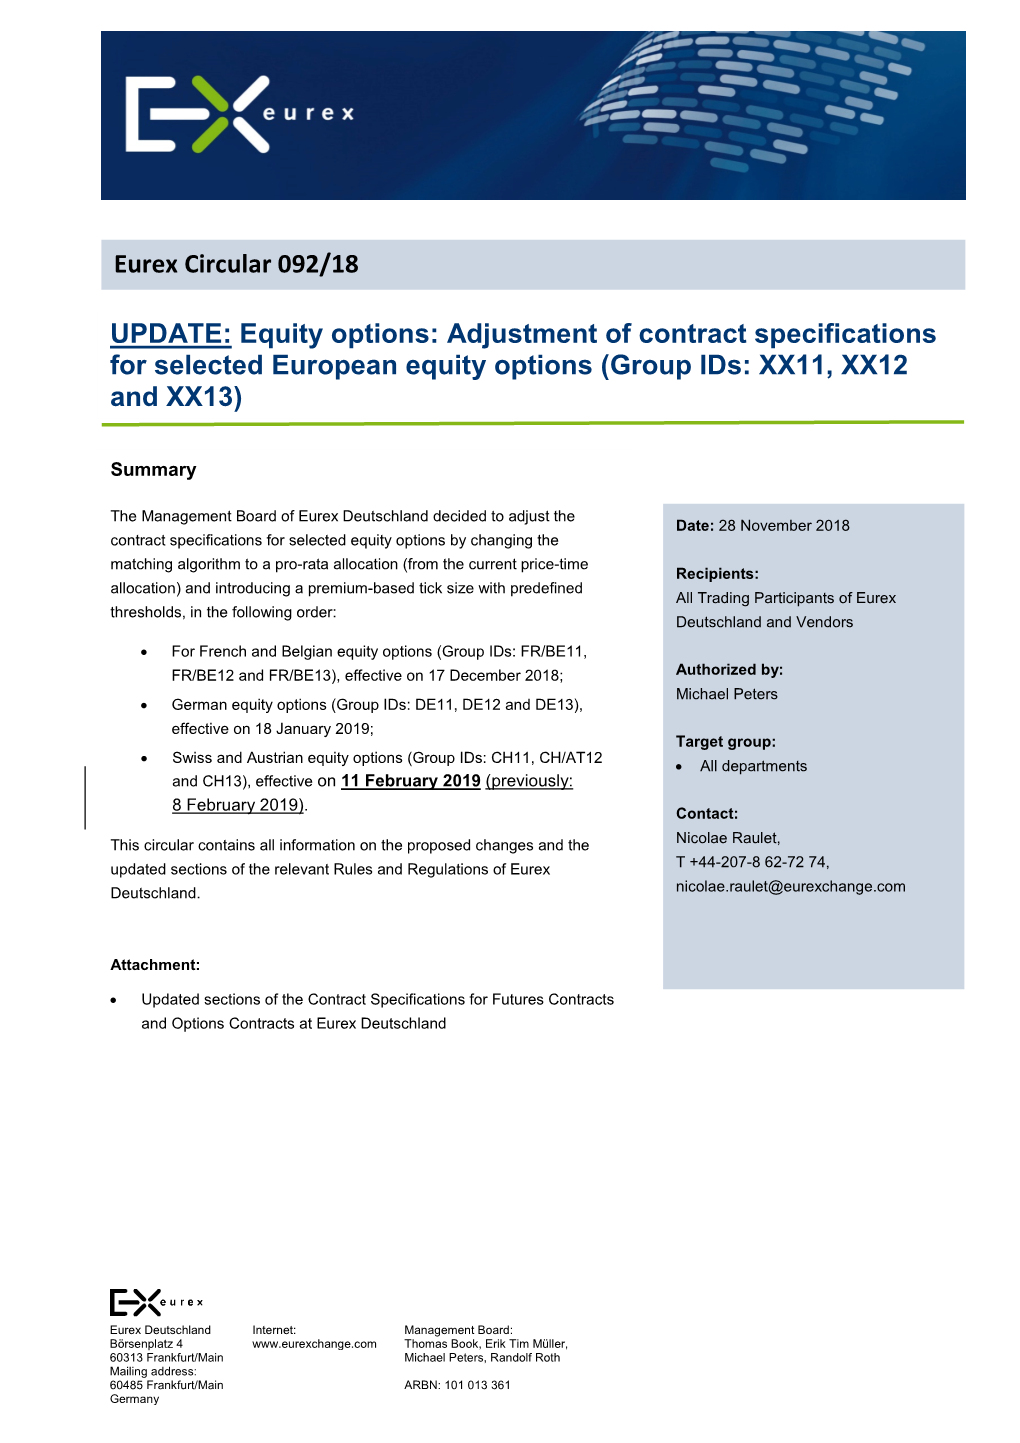 Equity Options: Adjustment of Contract Specifications for Selected European Equity Options (Group Ids: XX11, XX12 and XX13)